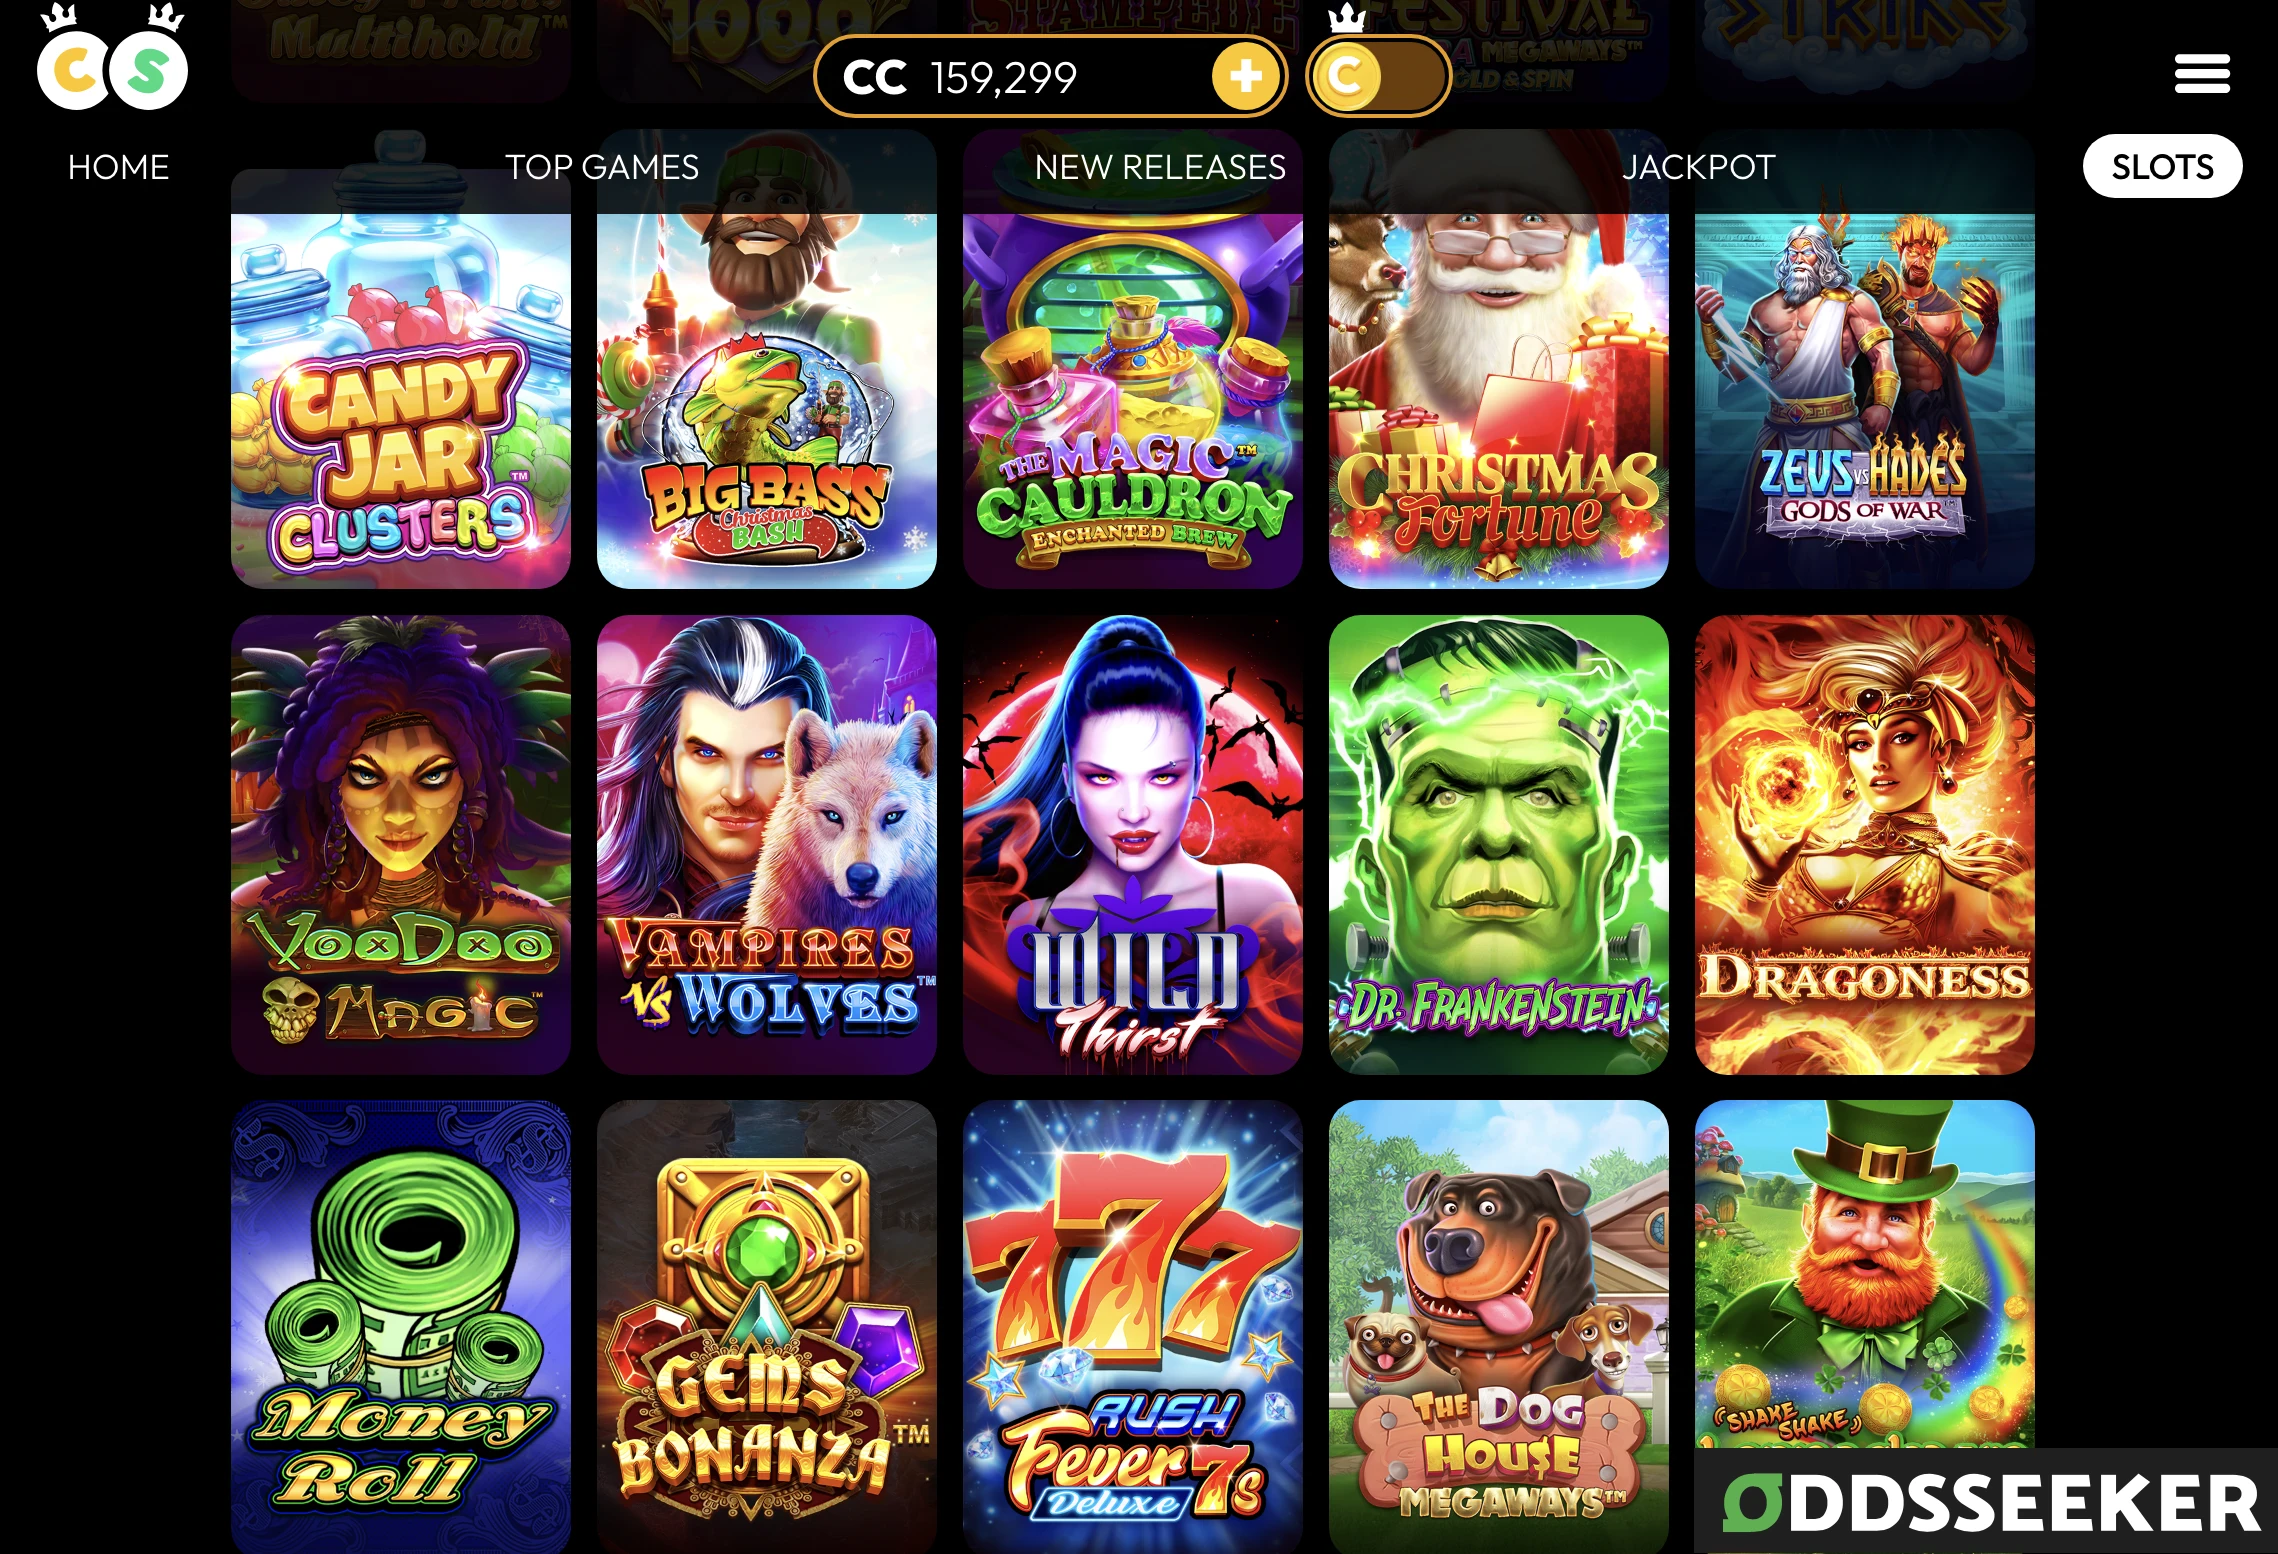 Screenshot of 15 games in Crown Coins lobby - inlcuding Big Bass Christmas Bash, The Magic Cauldron, and Dr. Frankenstein